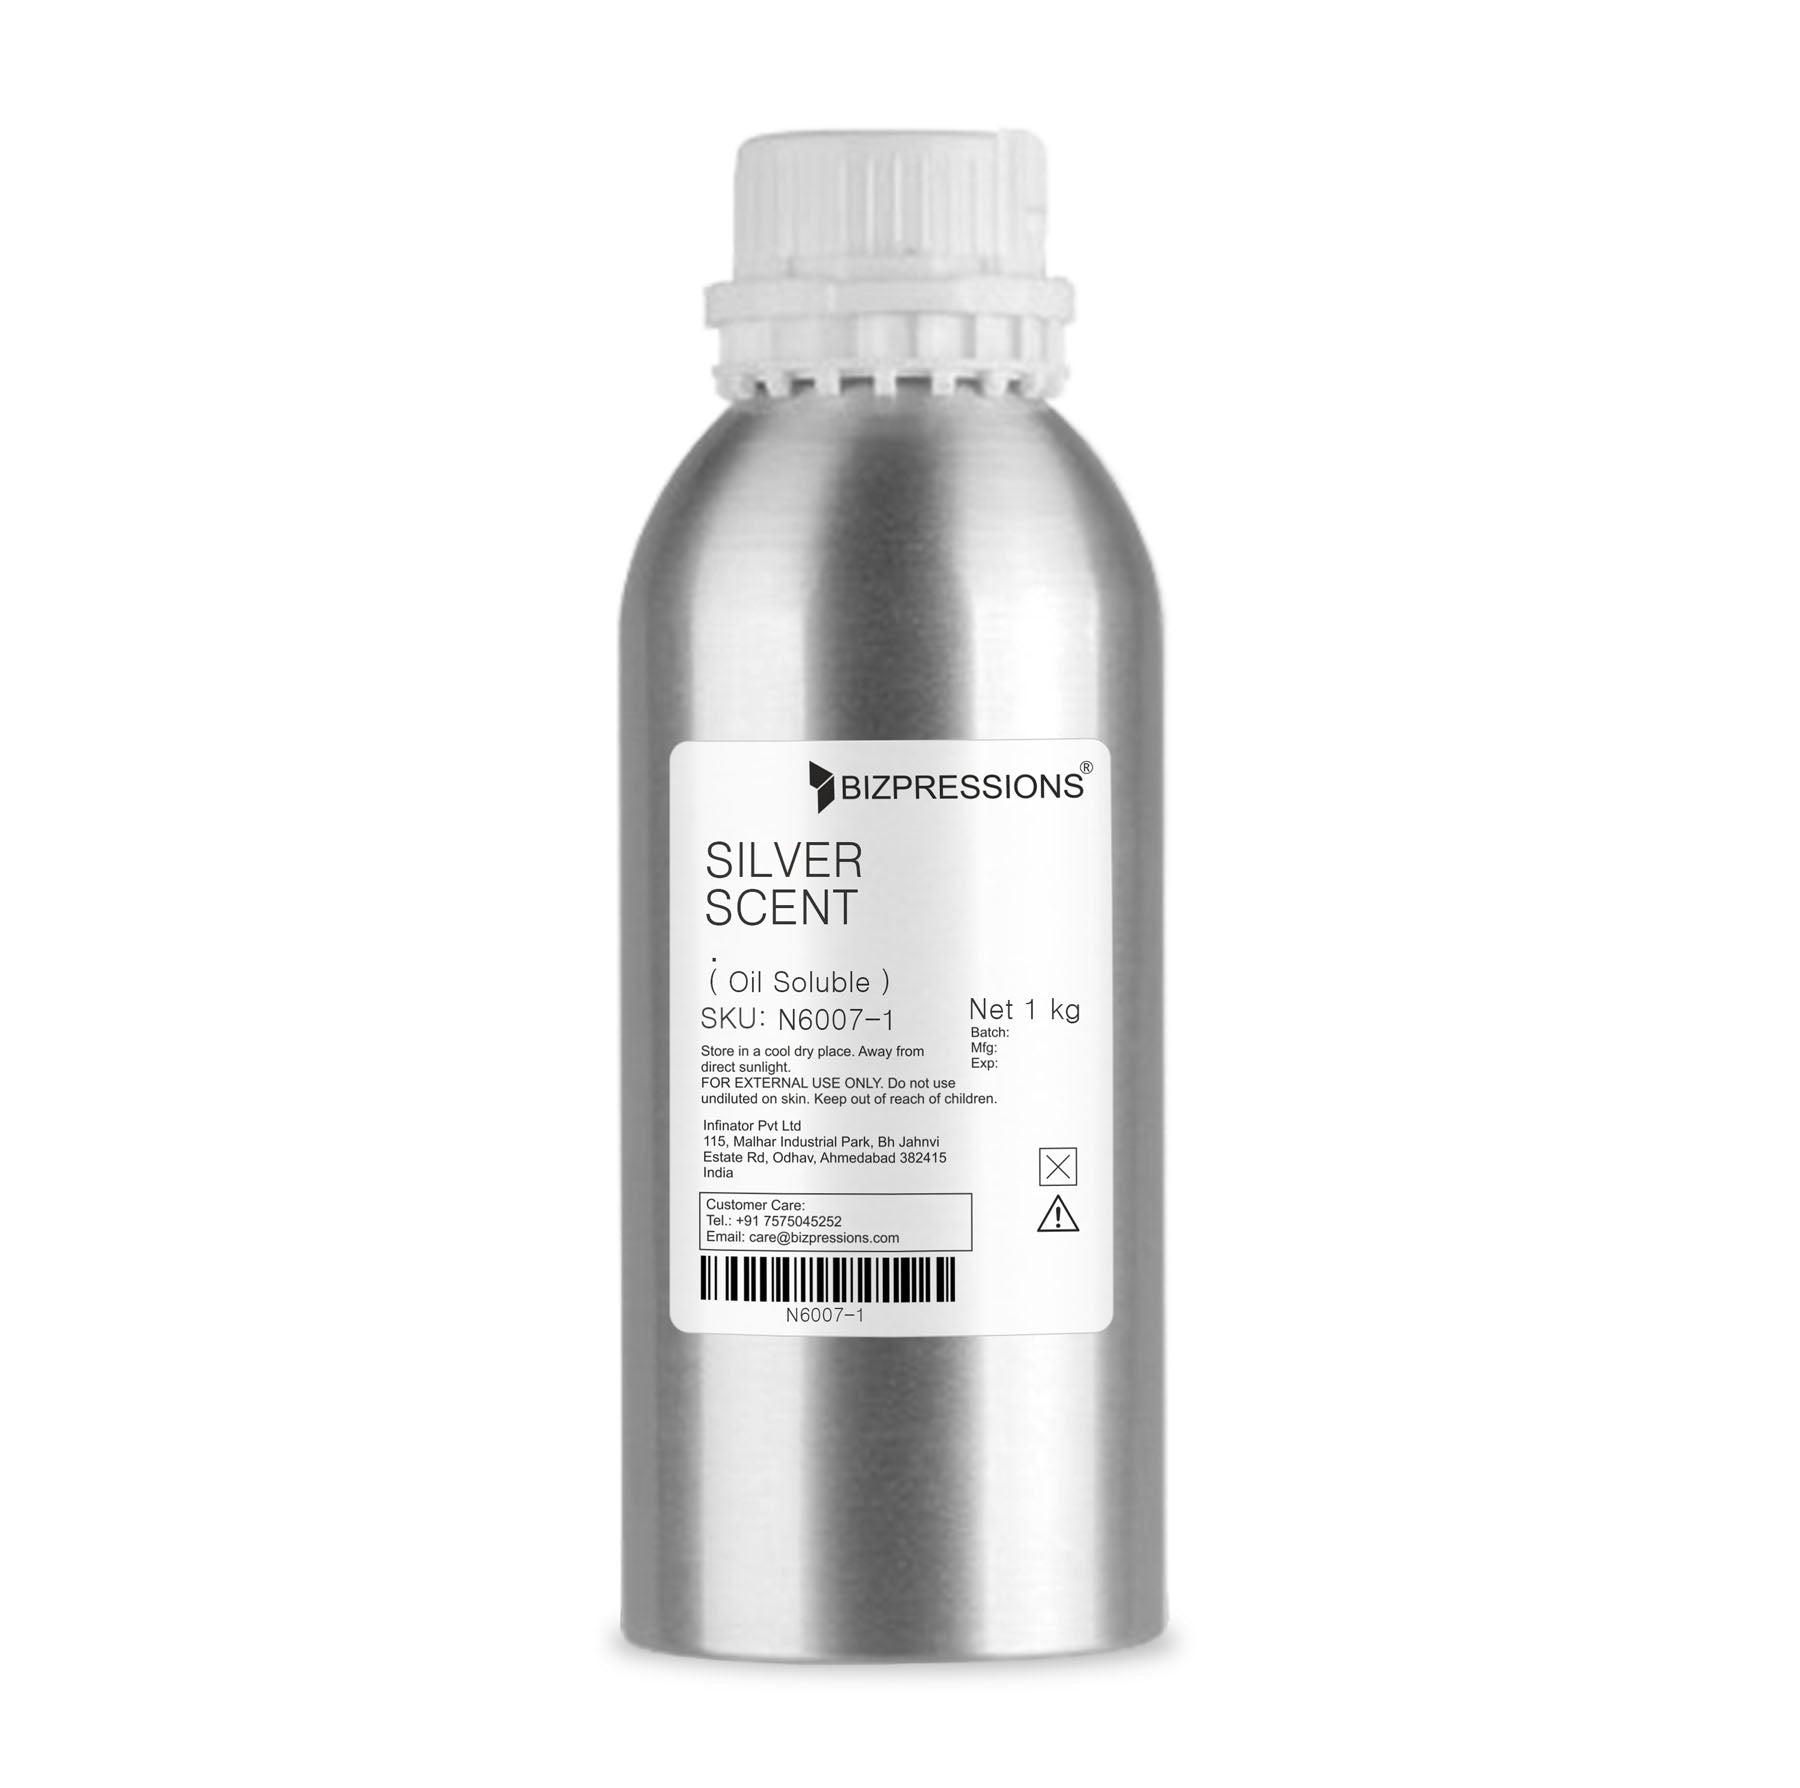 SILVER SCENT - Fragrance ( Oil Soluble ) - 1 kg